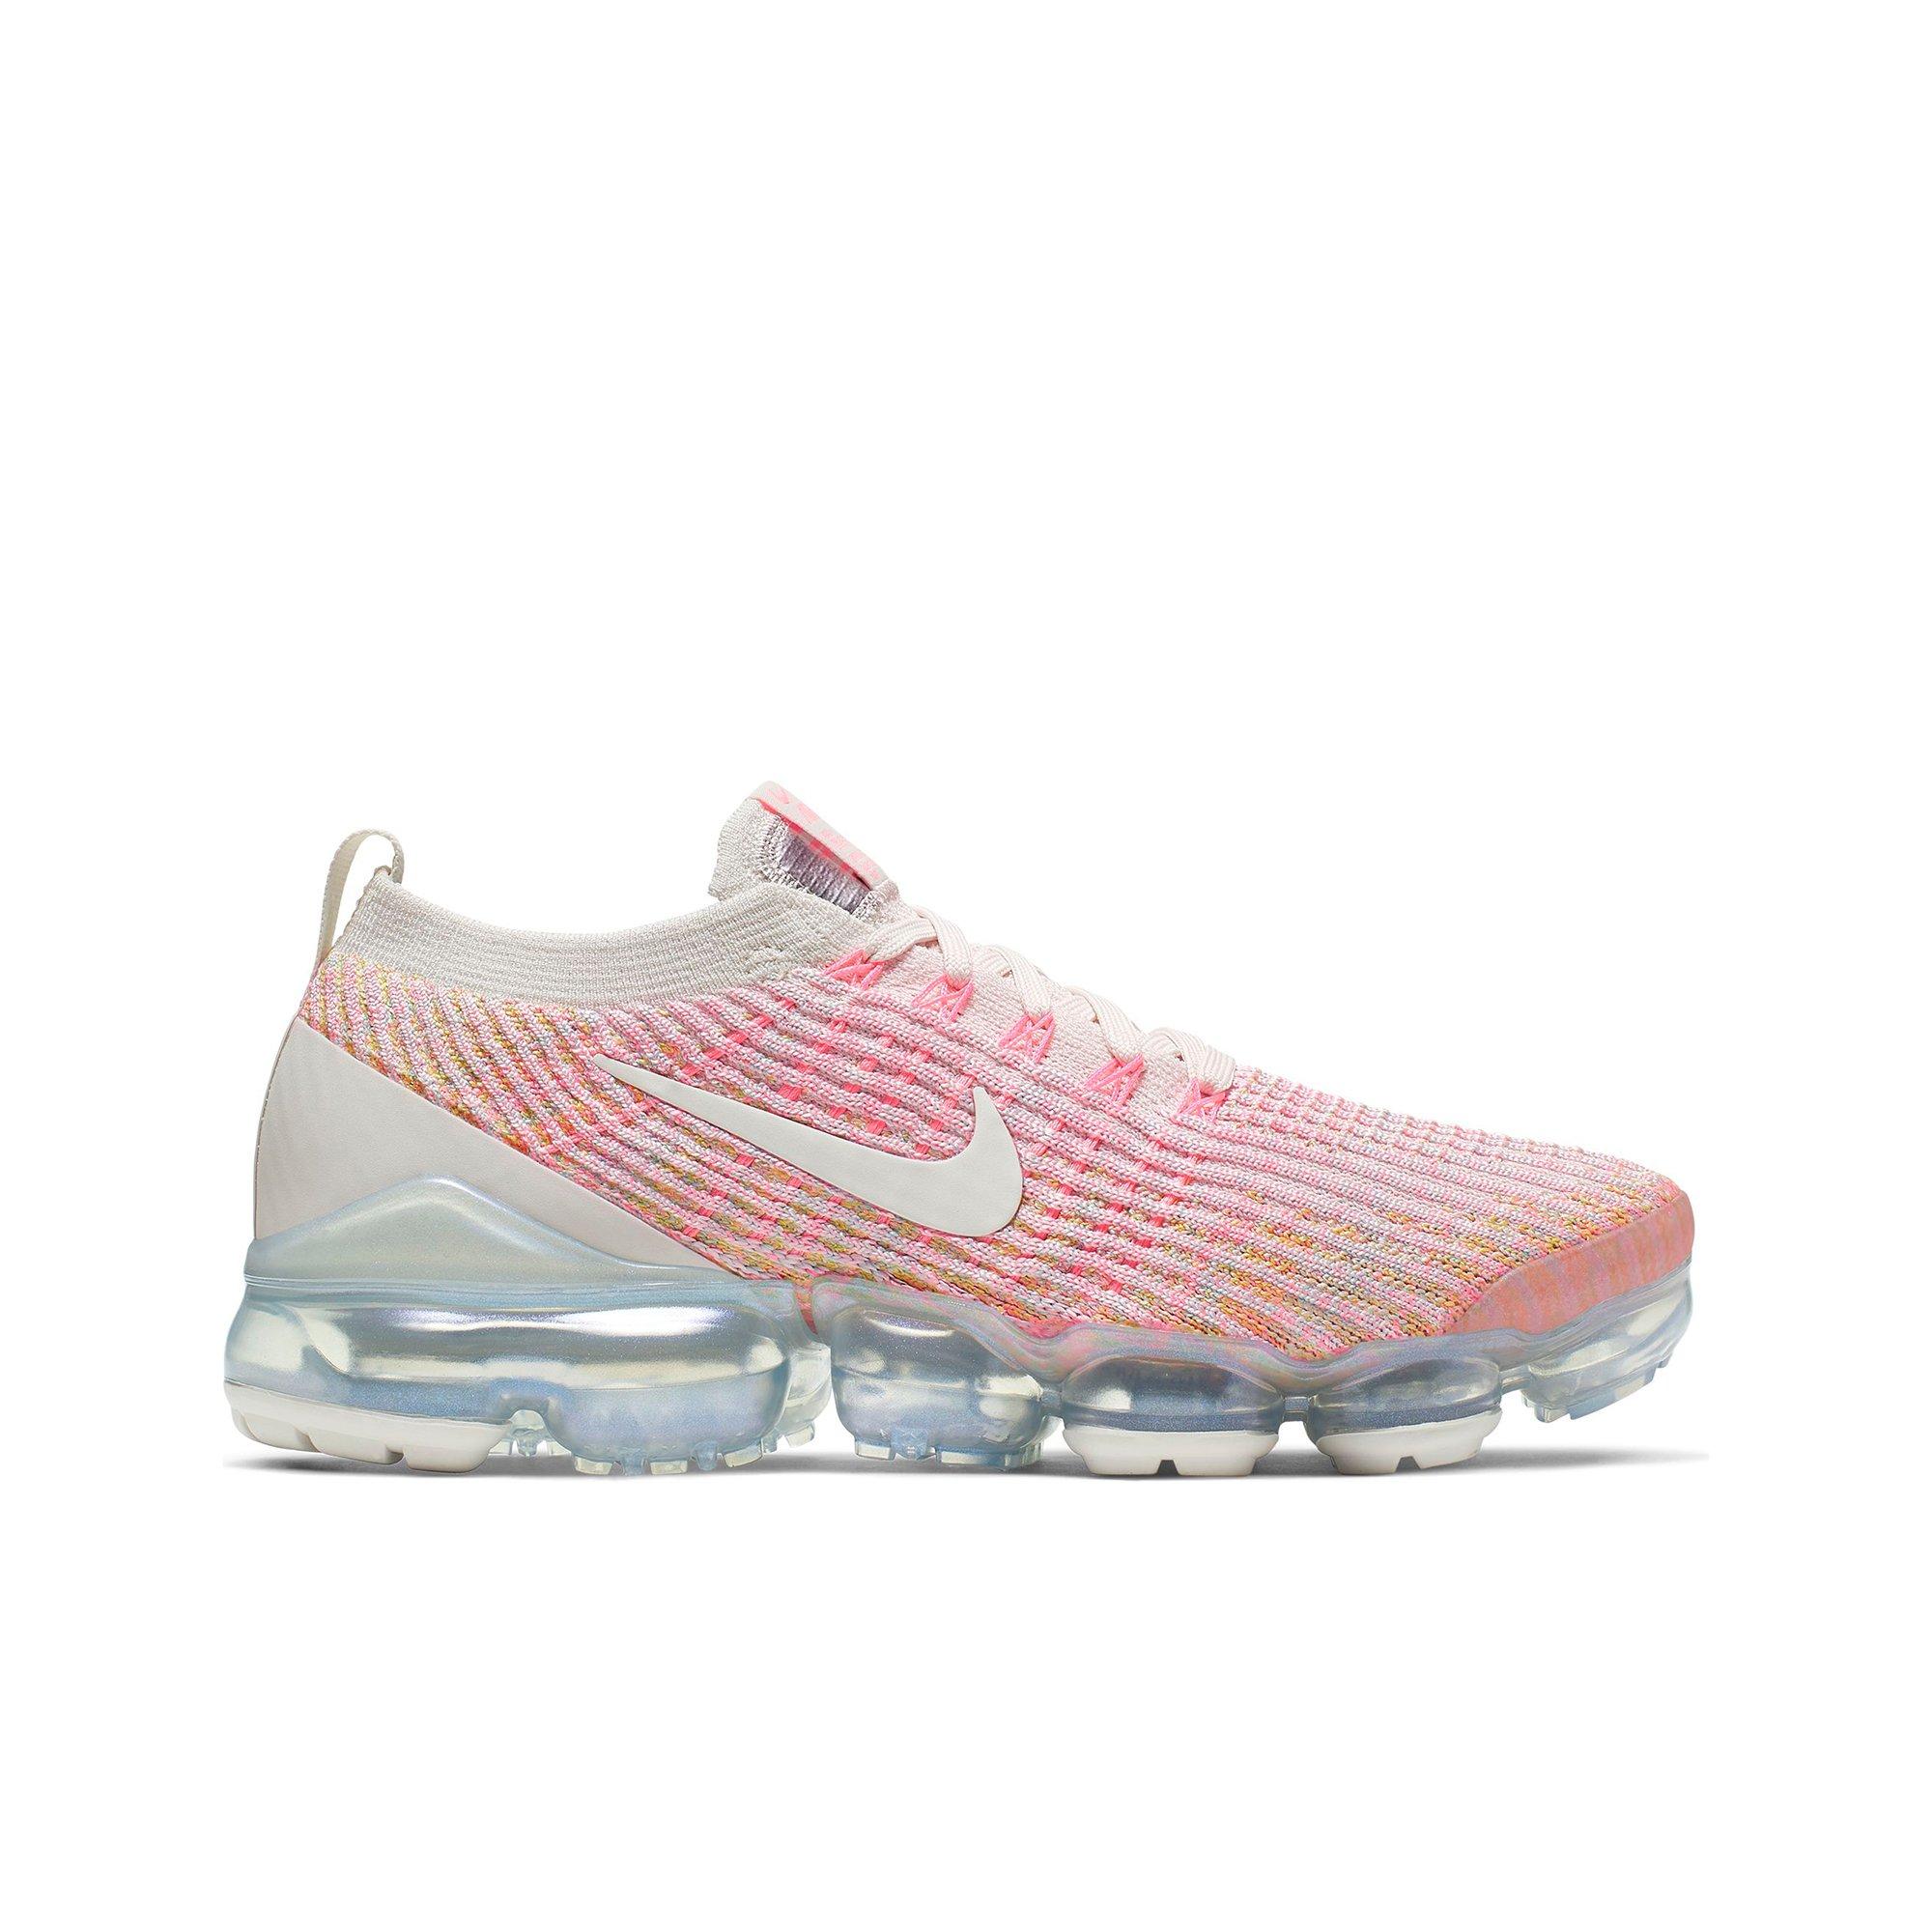 nike vapormax flyknit pink and white